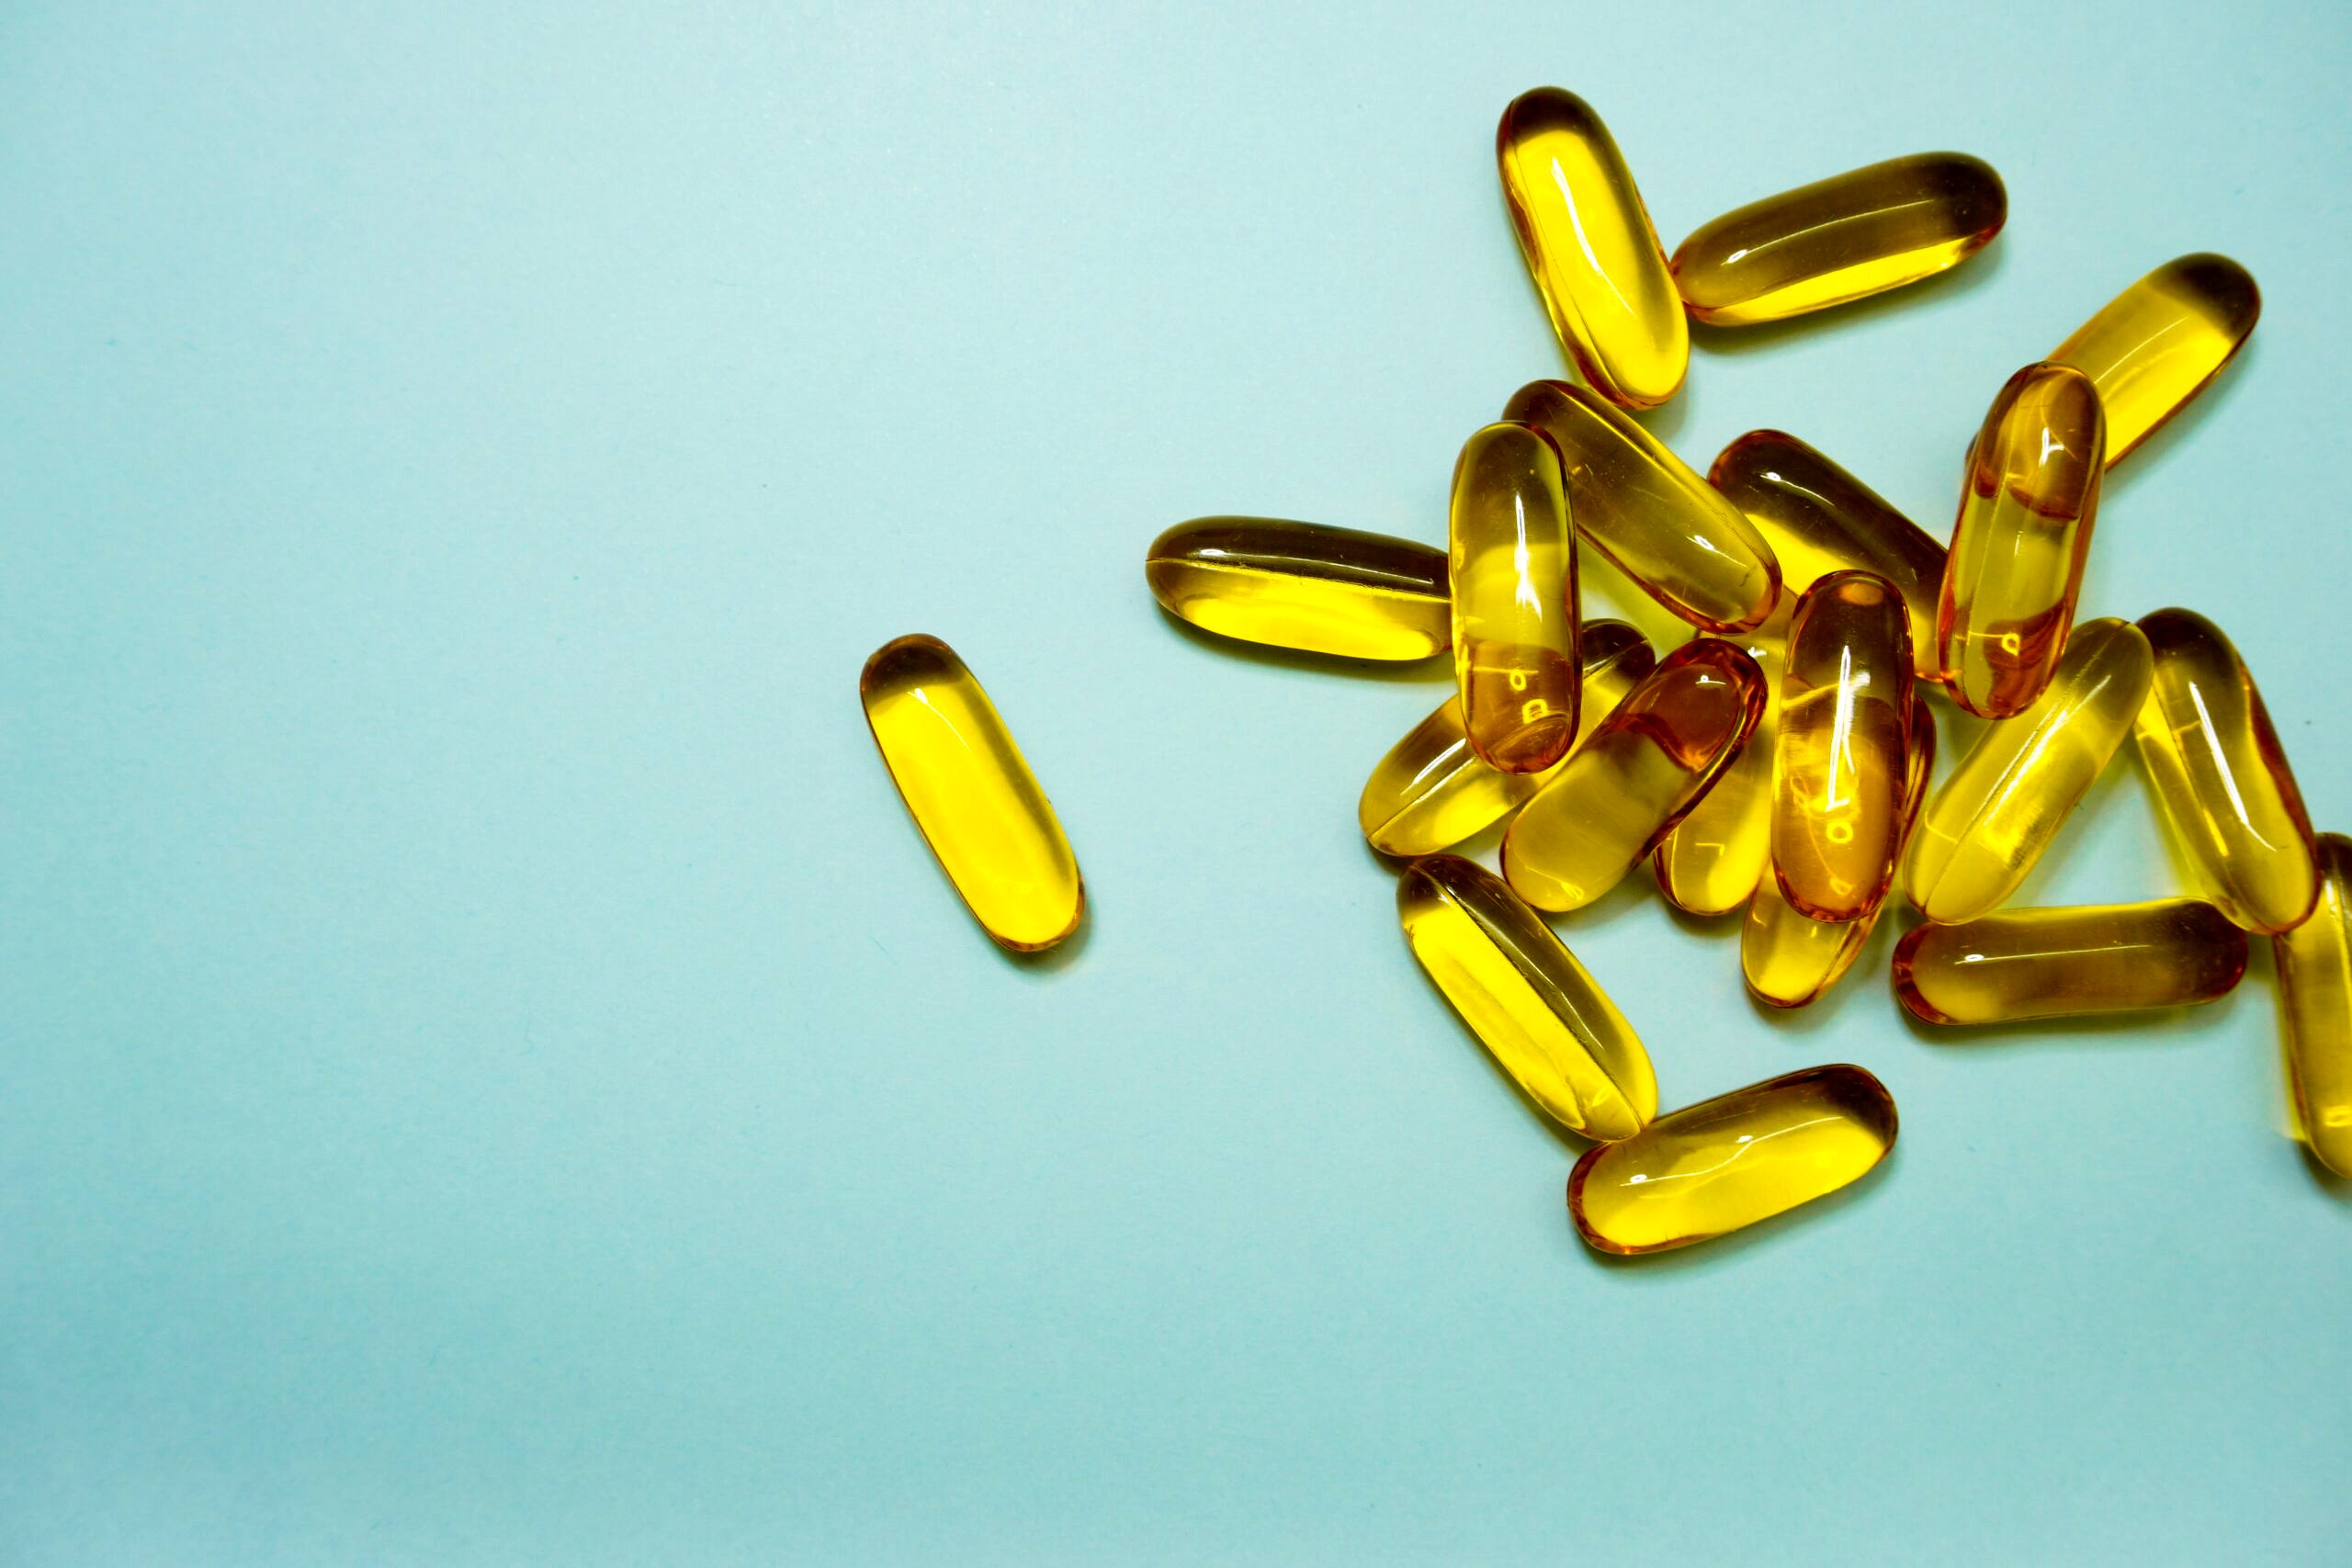 Yellow supplements against a blue background.